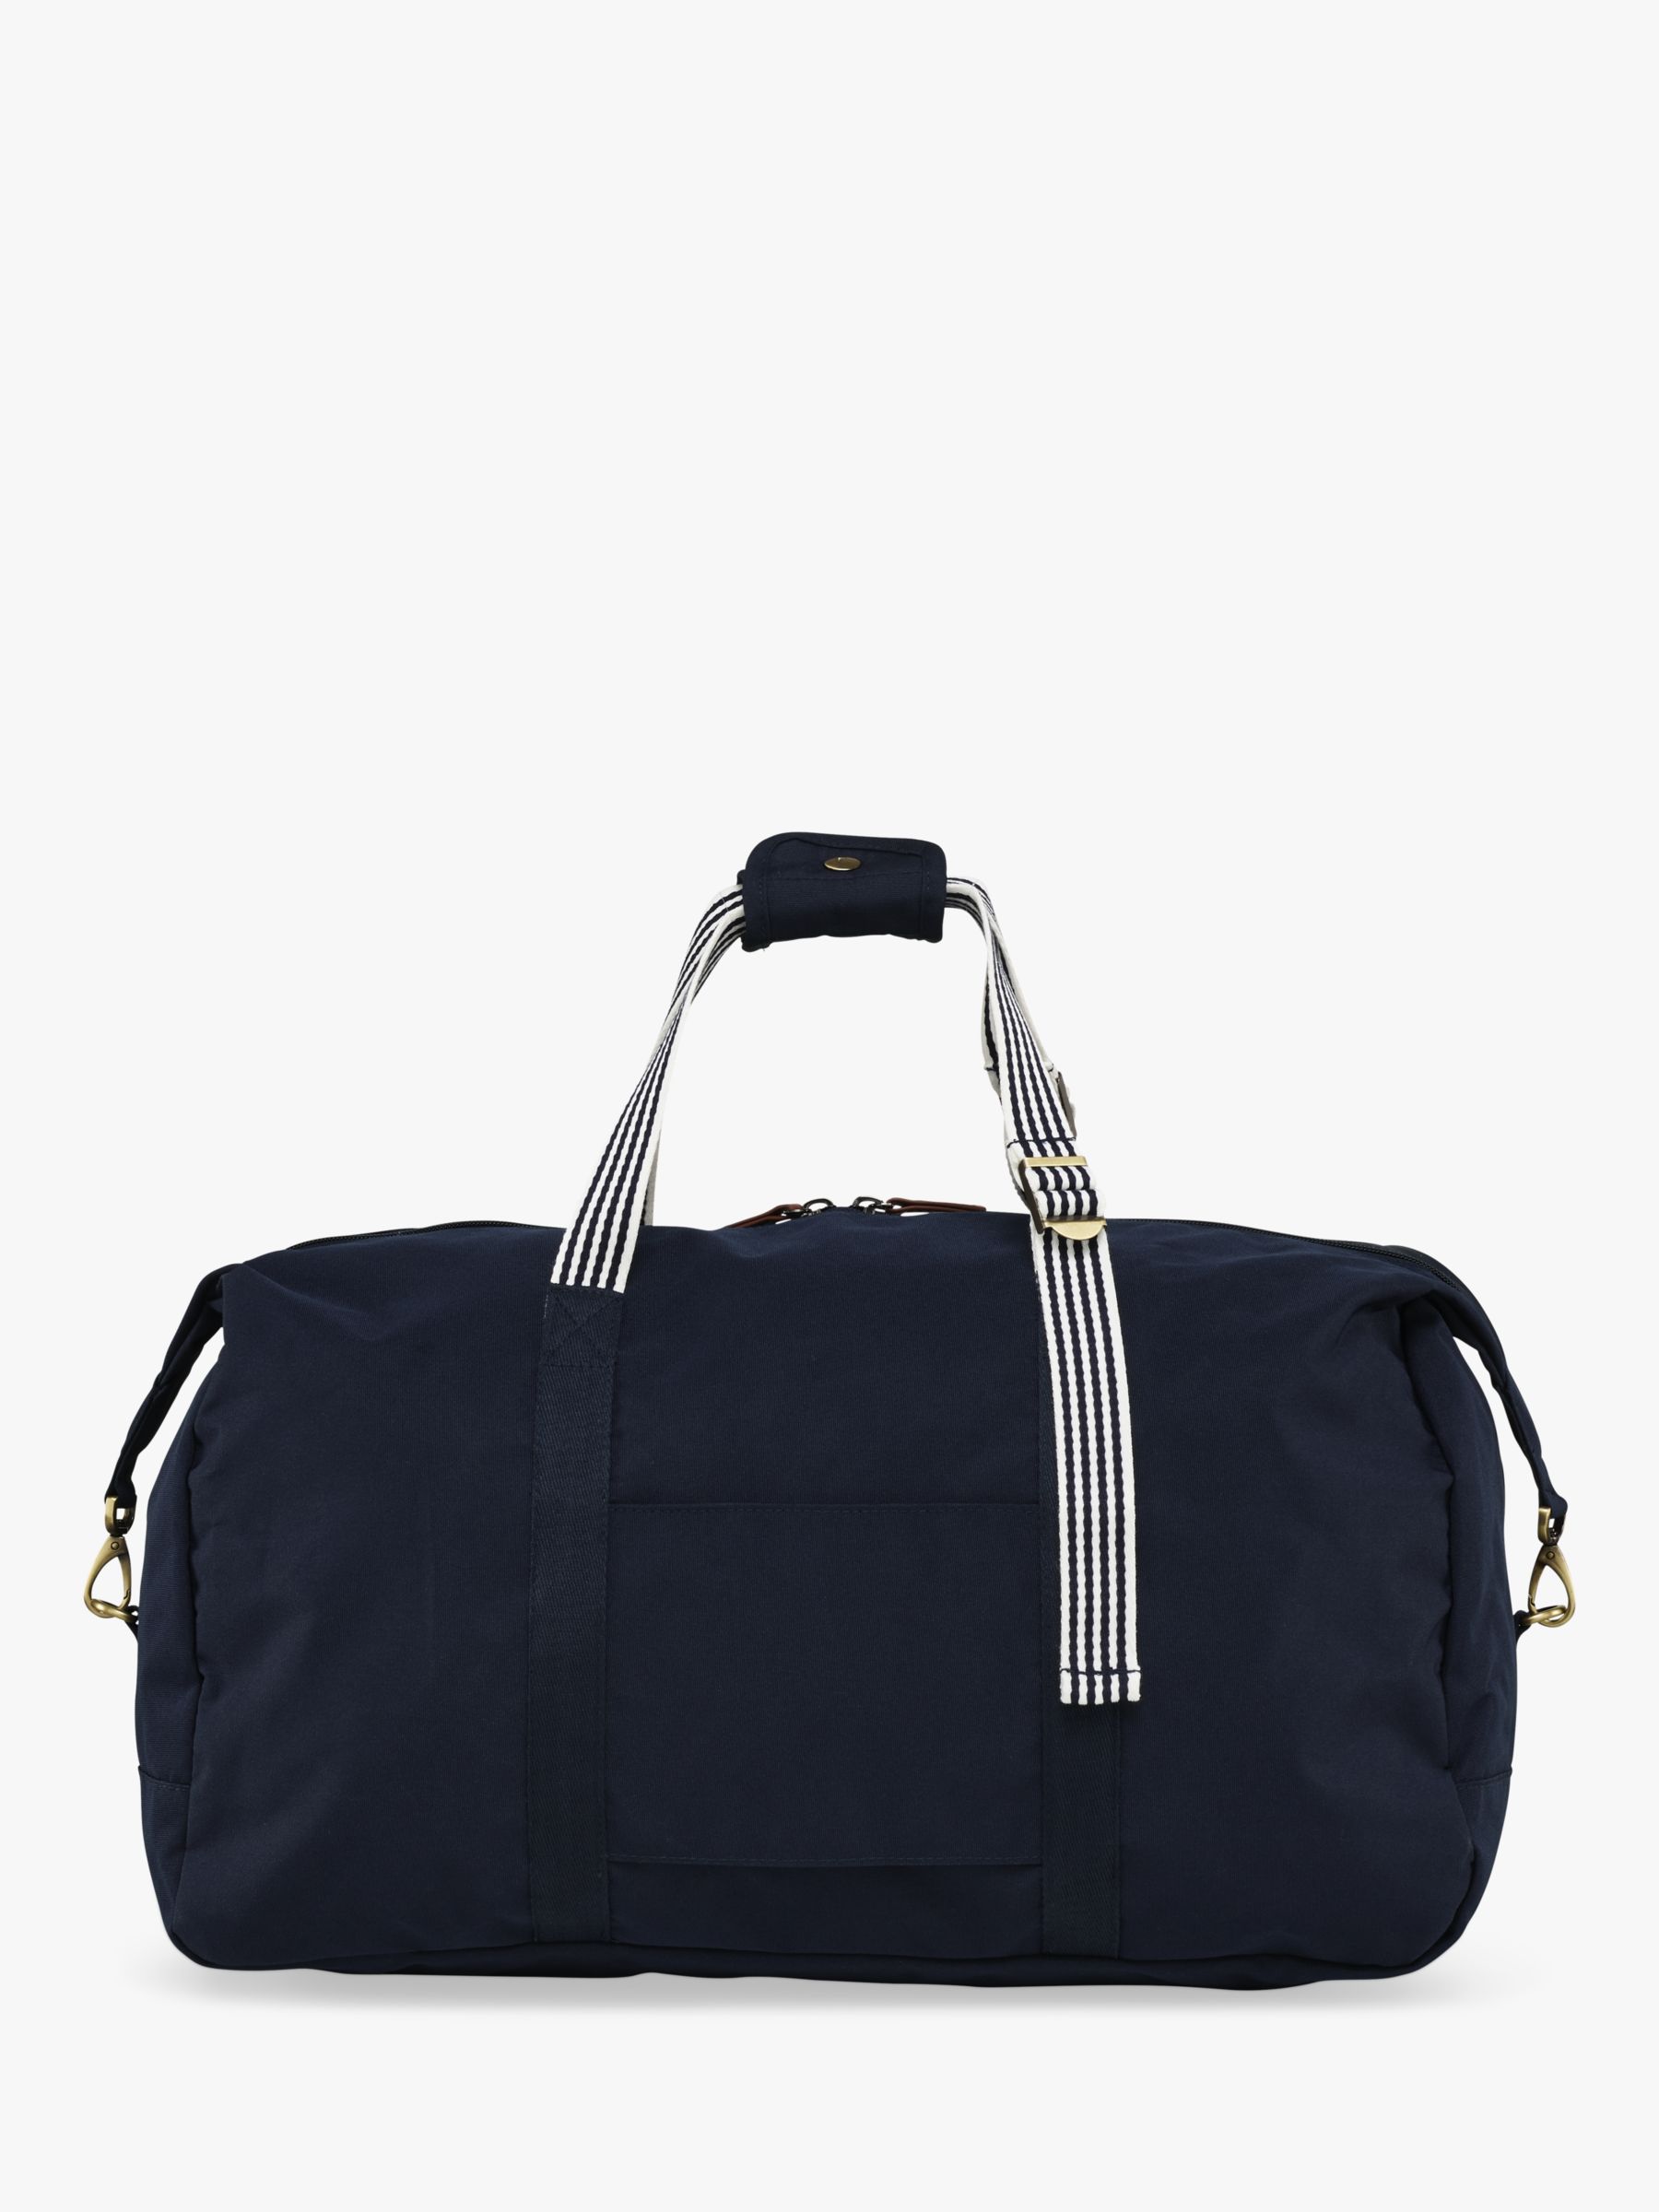 Joules Coast Collection Duffle Bag, French Navy